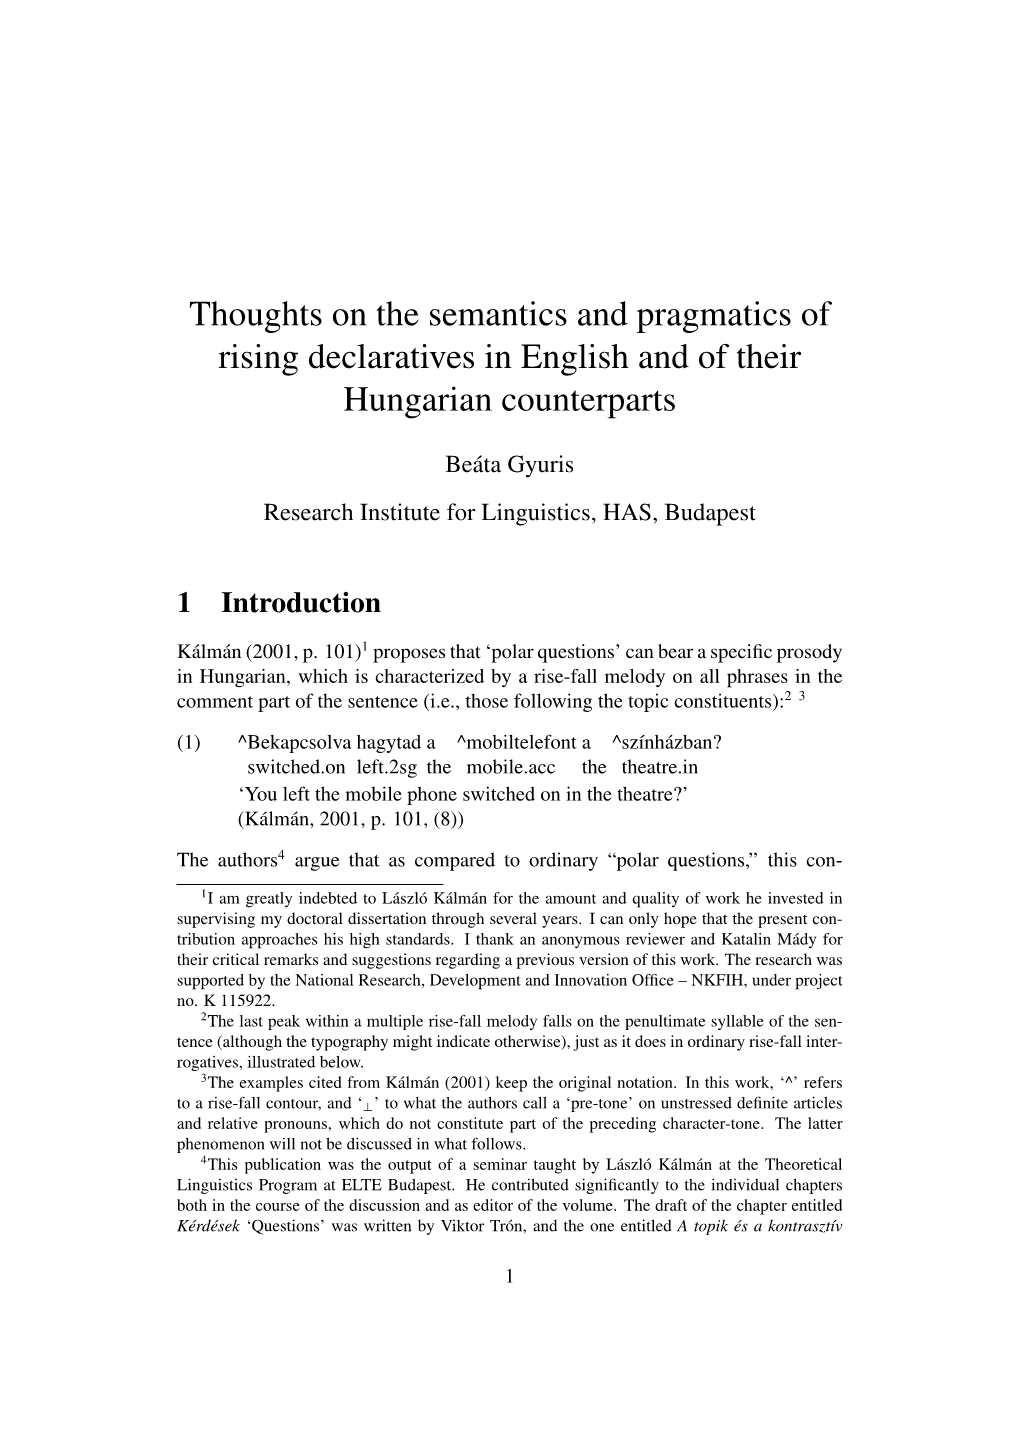 Thoughts on the Semantics and Pragmatics of Rising Declaratives in English and of Their Hungarian Counterparts